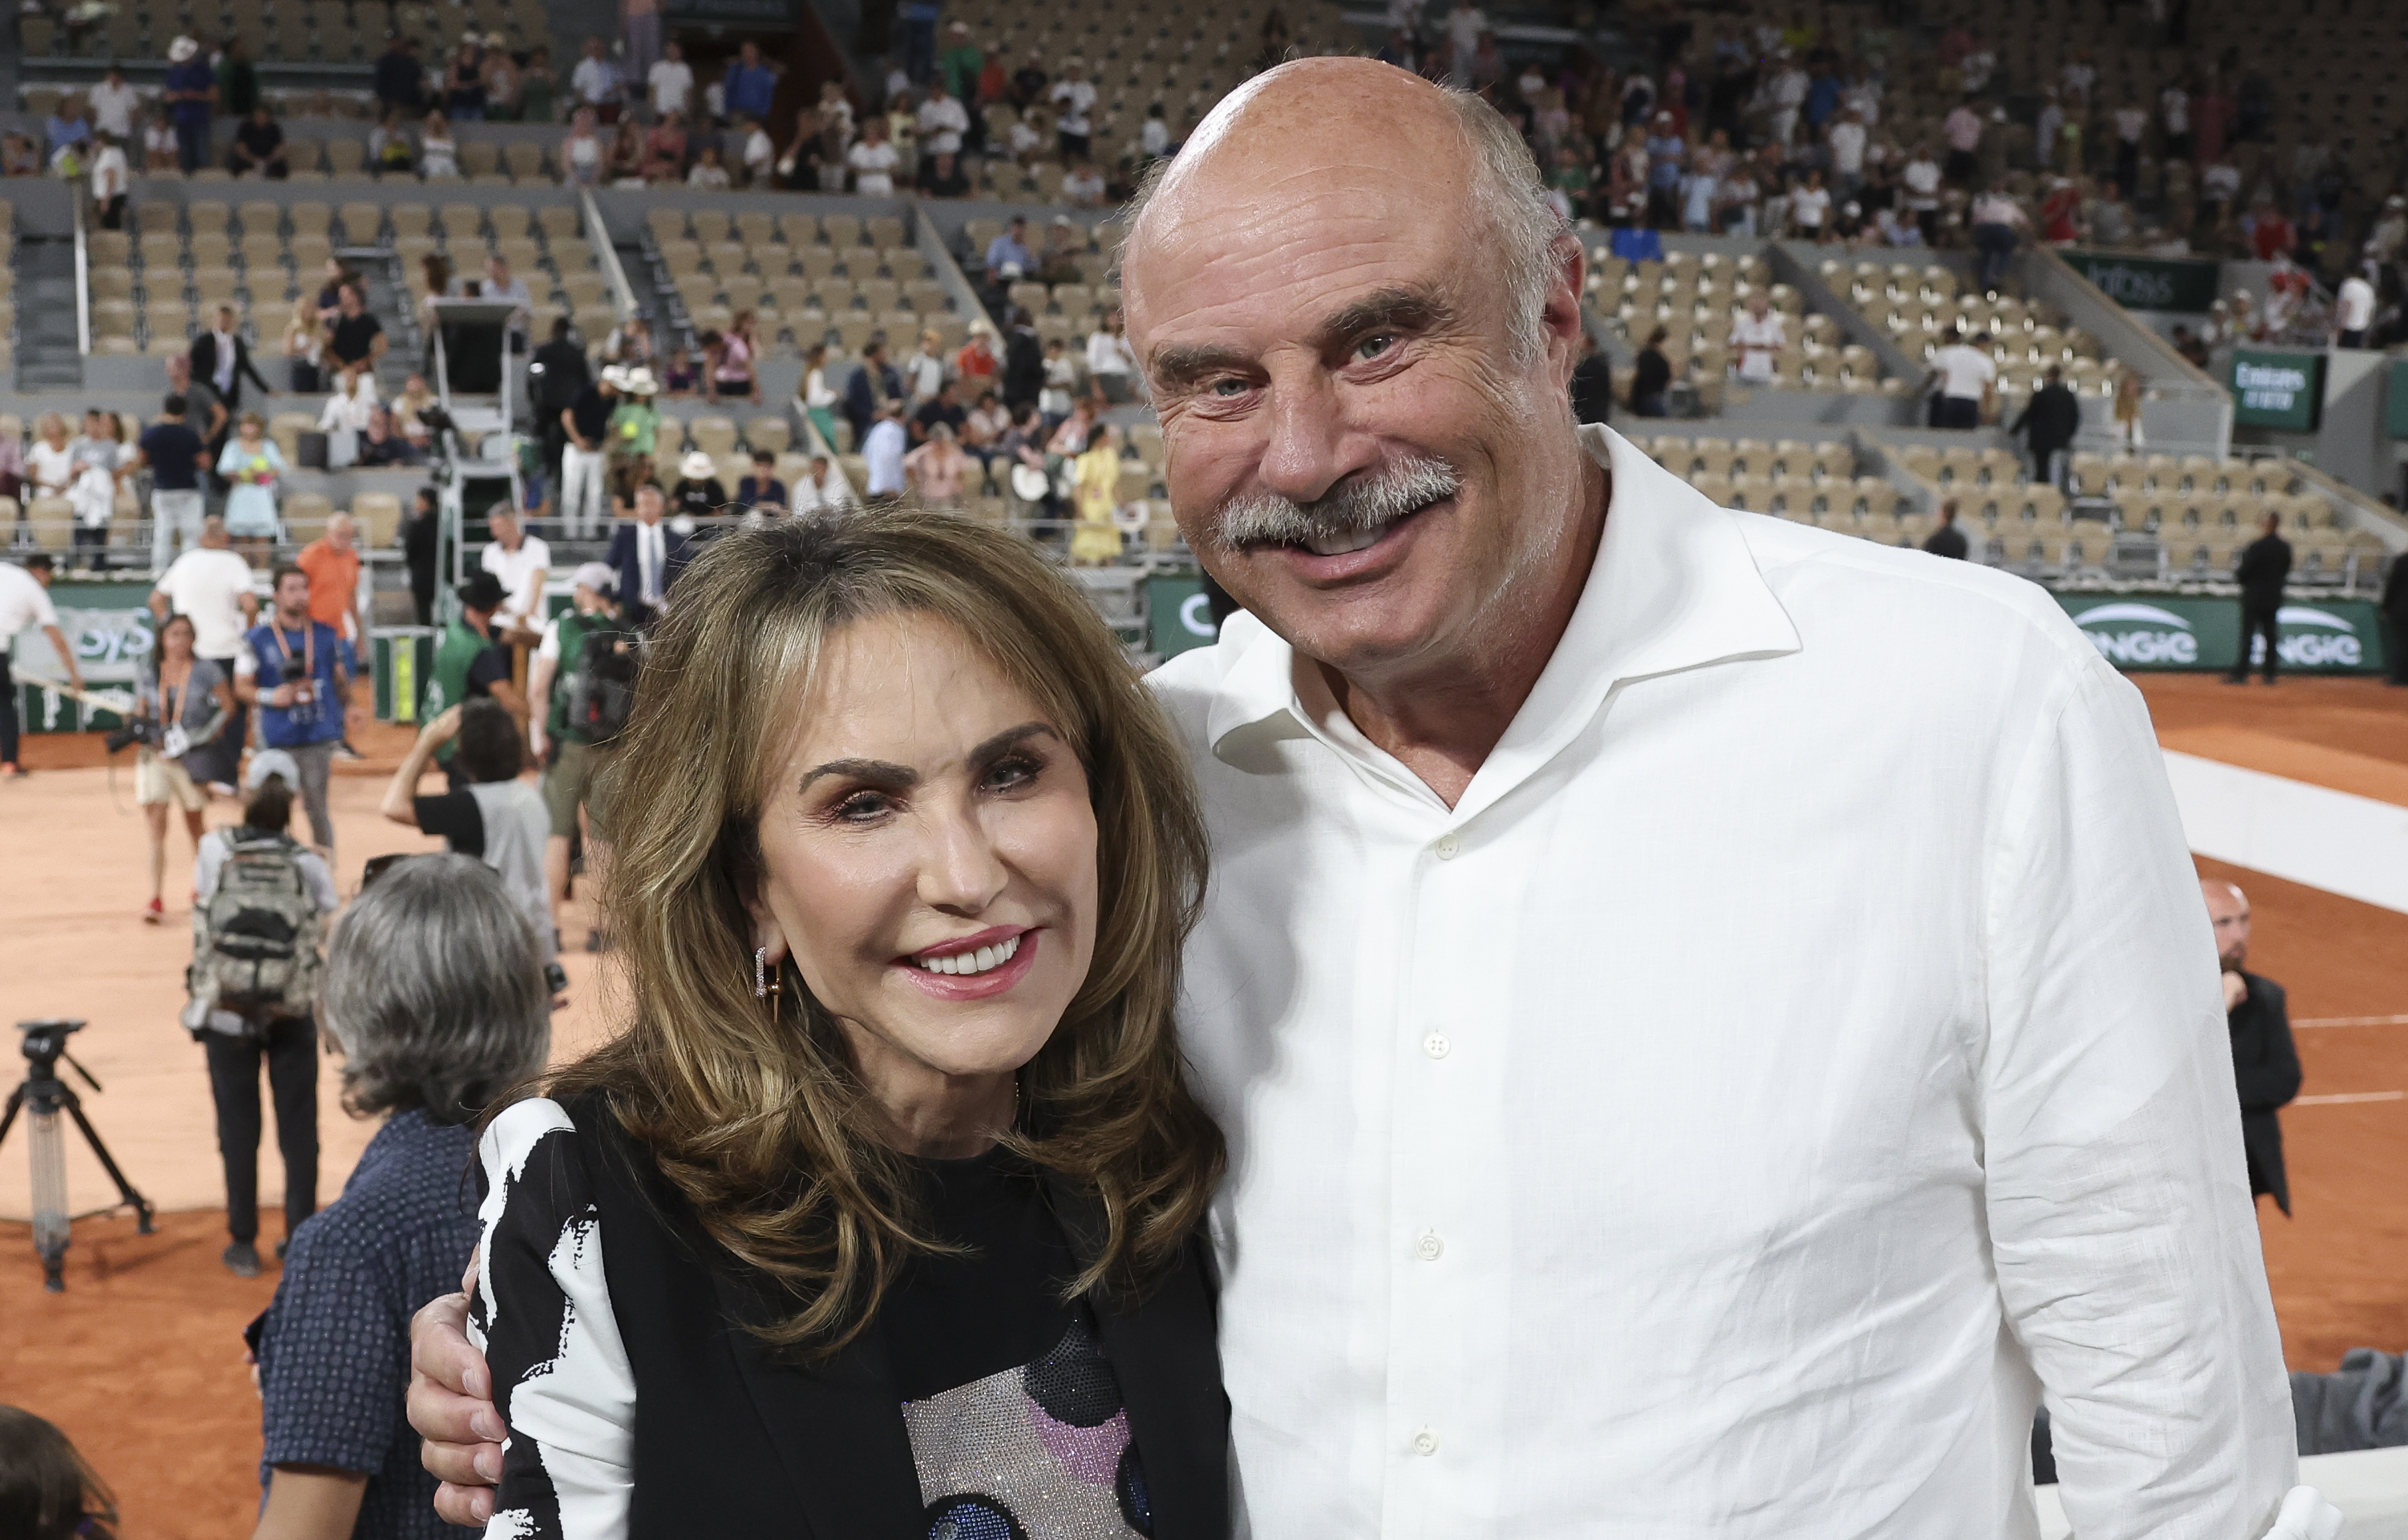 Phil McGraw and his wife Robin McGraw on June 4, 2022 in Paris, France | Source: Getty Images